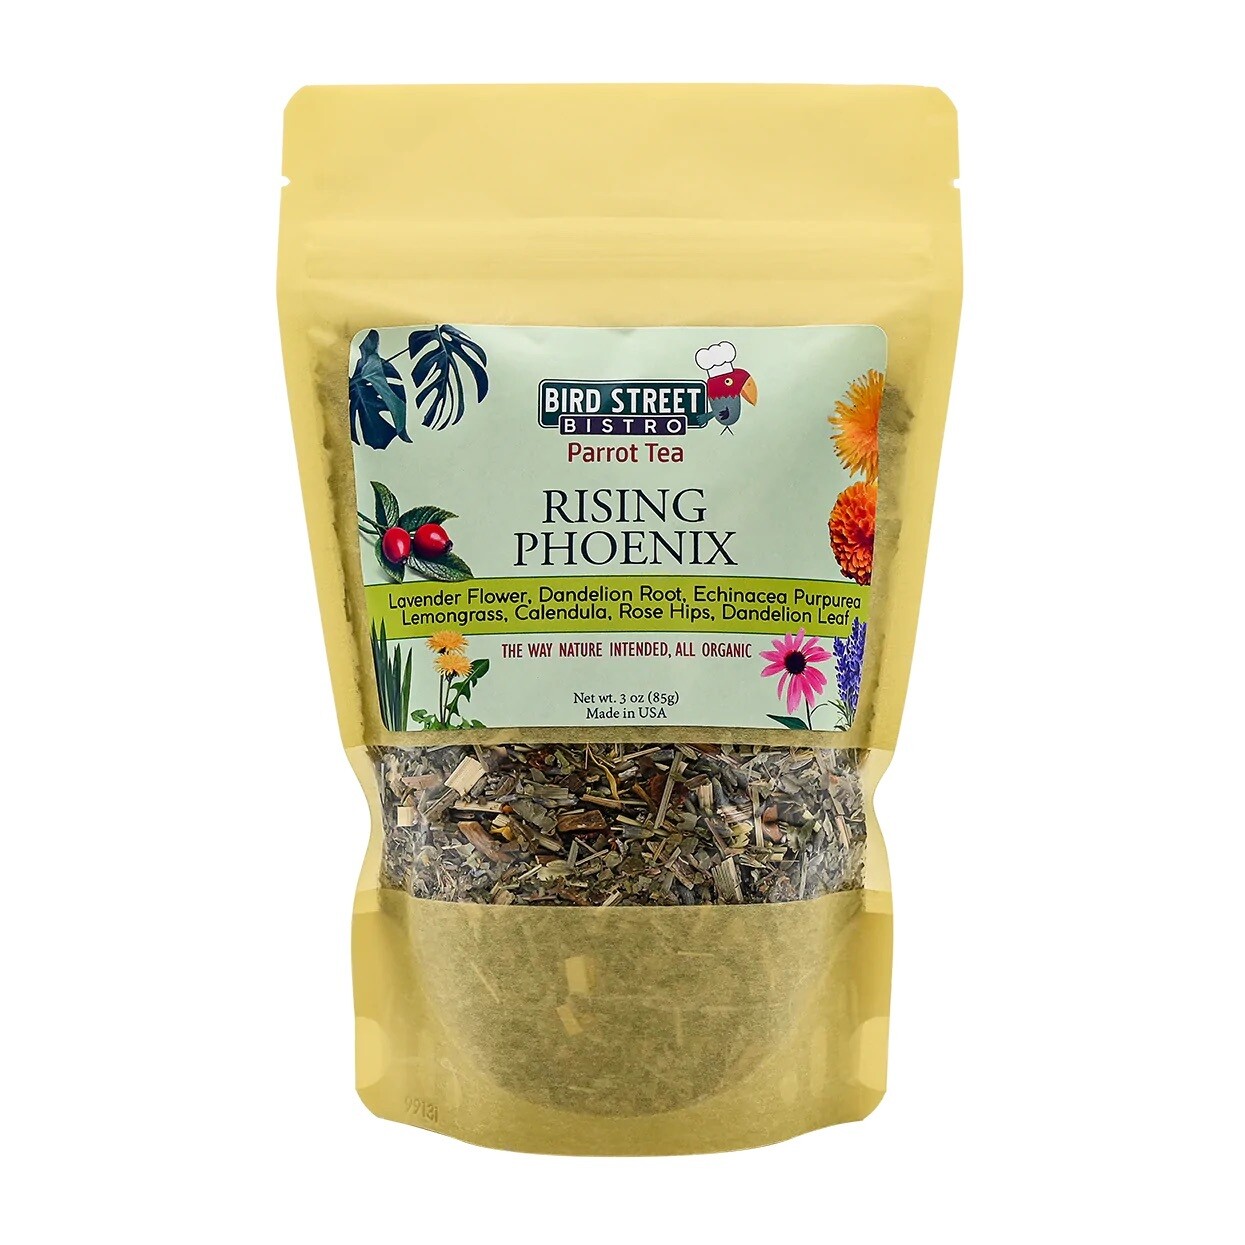 RISING PHOENIX - PARROT TEA 100% Organic, human grade healing herbs. Rising phoenix's mixture of organic herbal tea is specifically made for your feathered friend. Antiseptic and anti-inflammatory